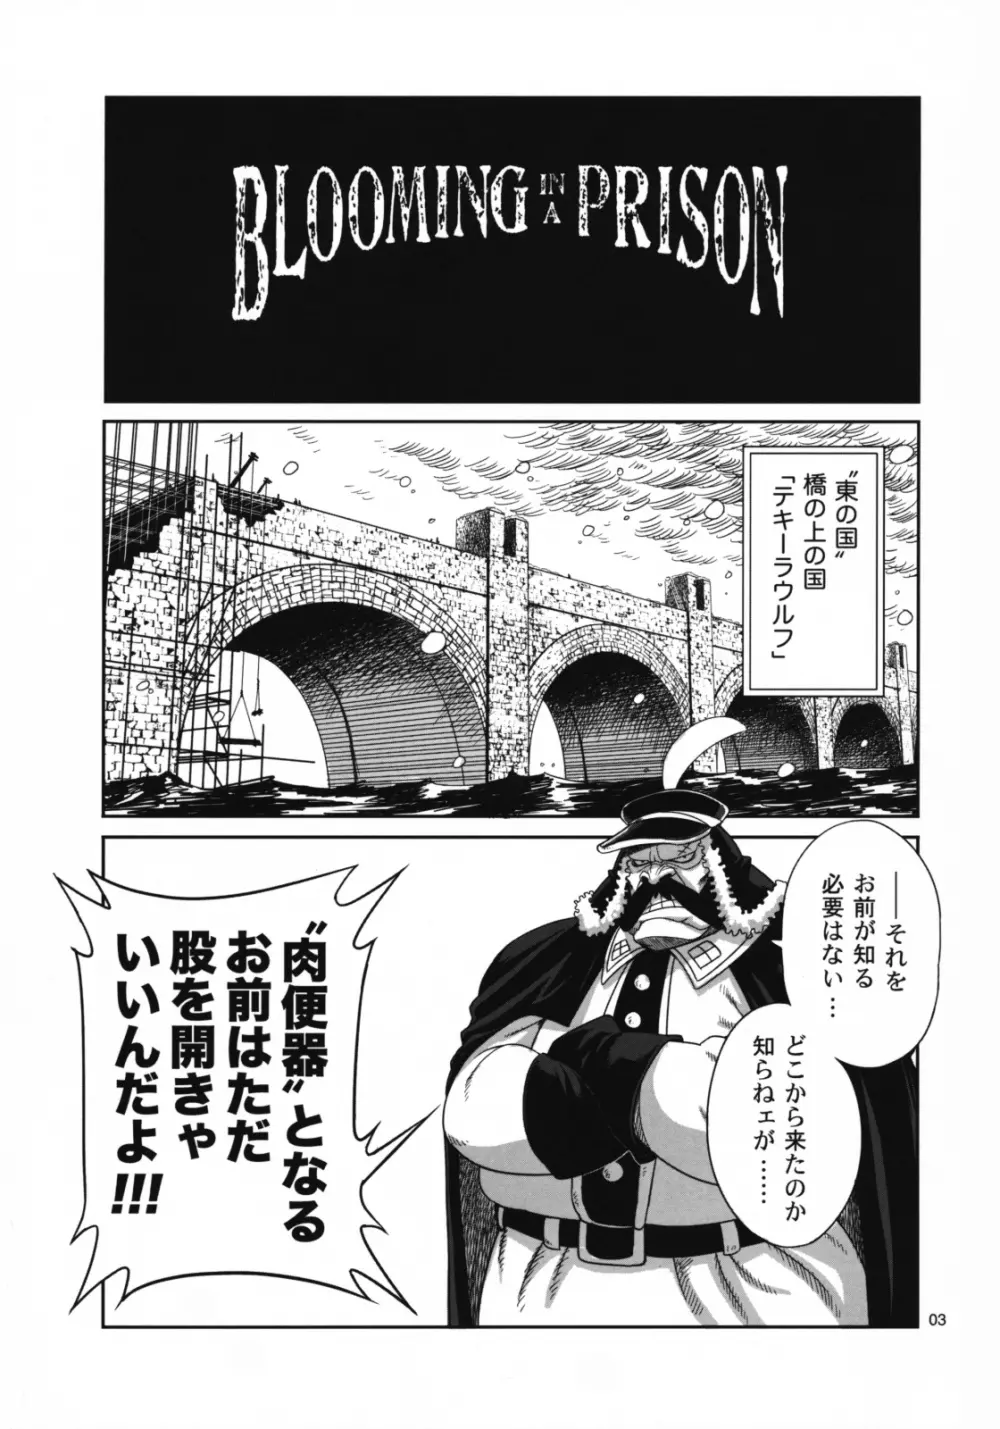 BLOOMING IN A PRISON 2ページ